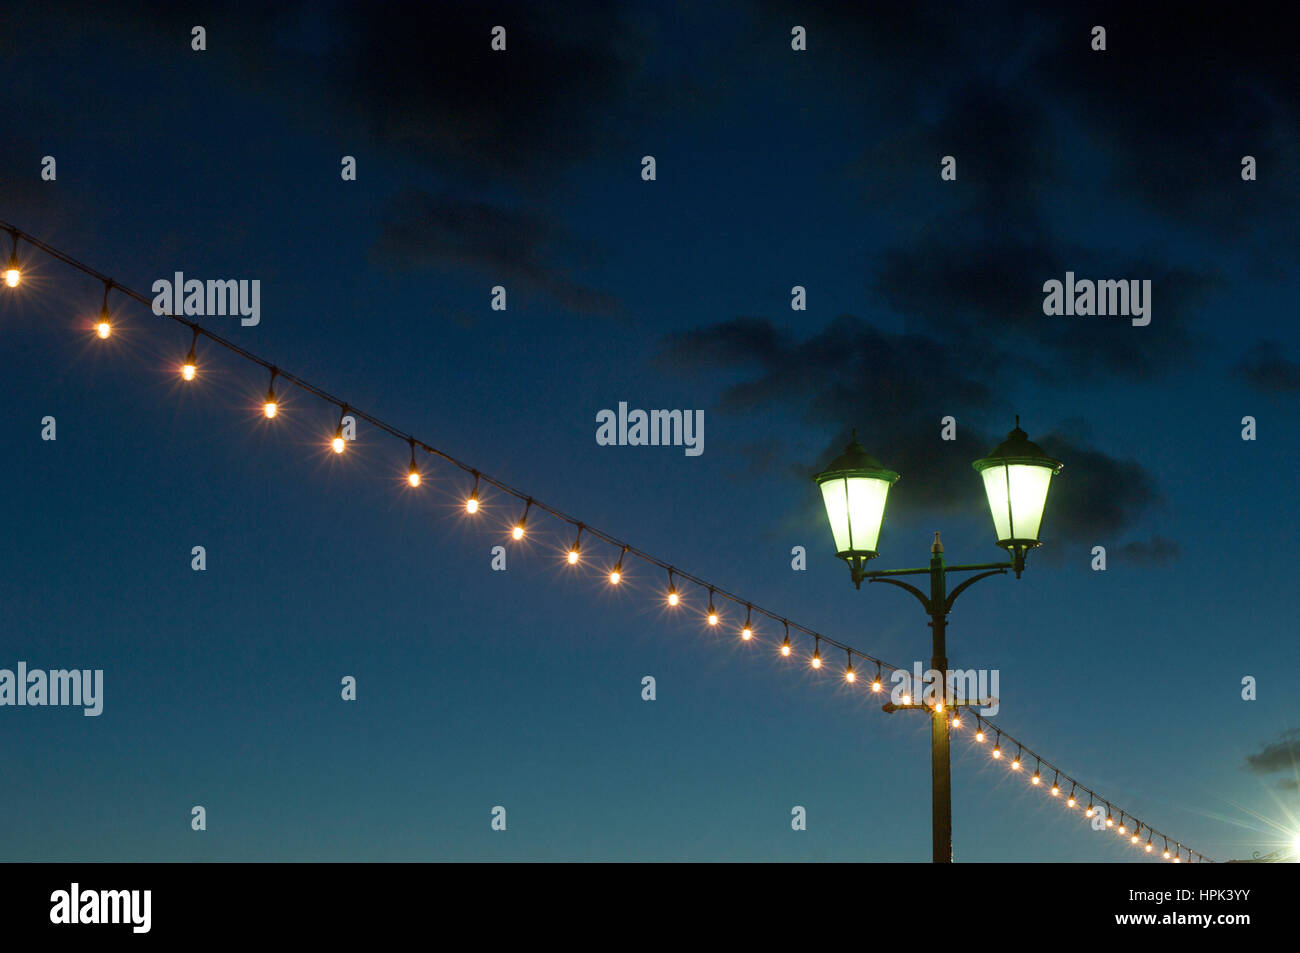 Street lamp and string of lights against darkening sky Stock Photo